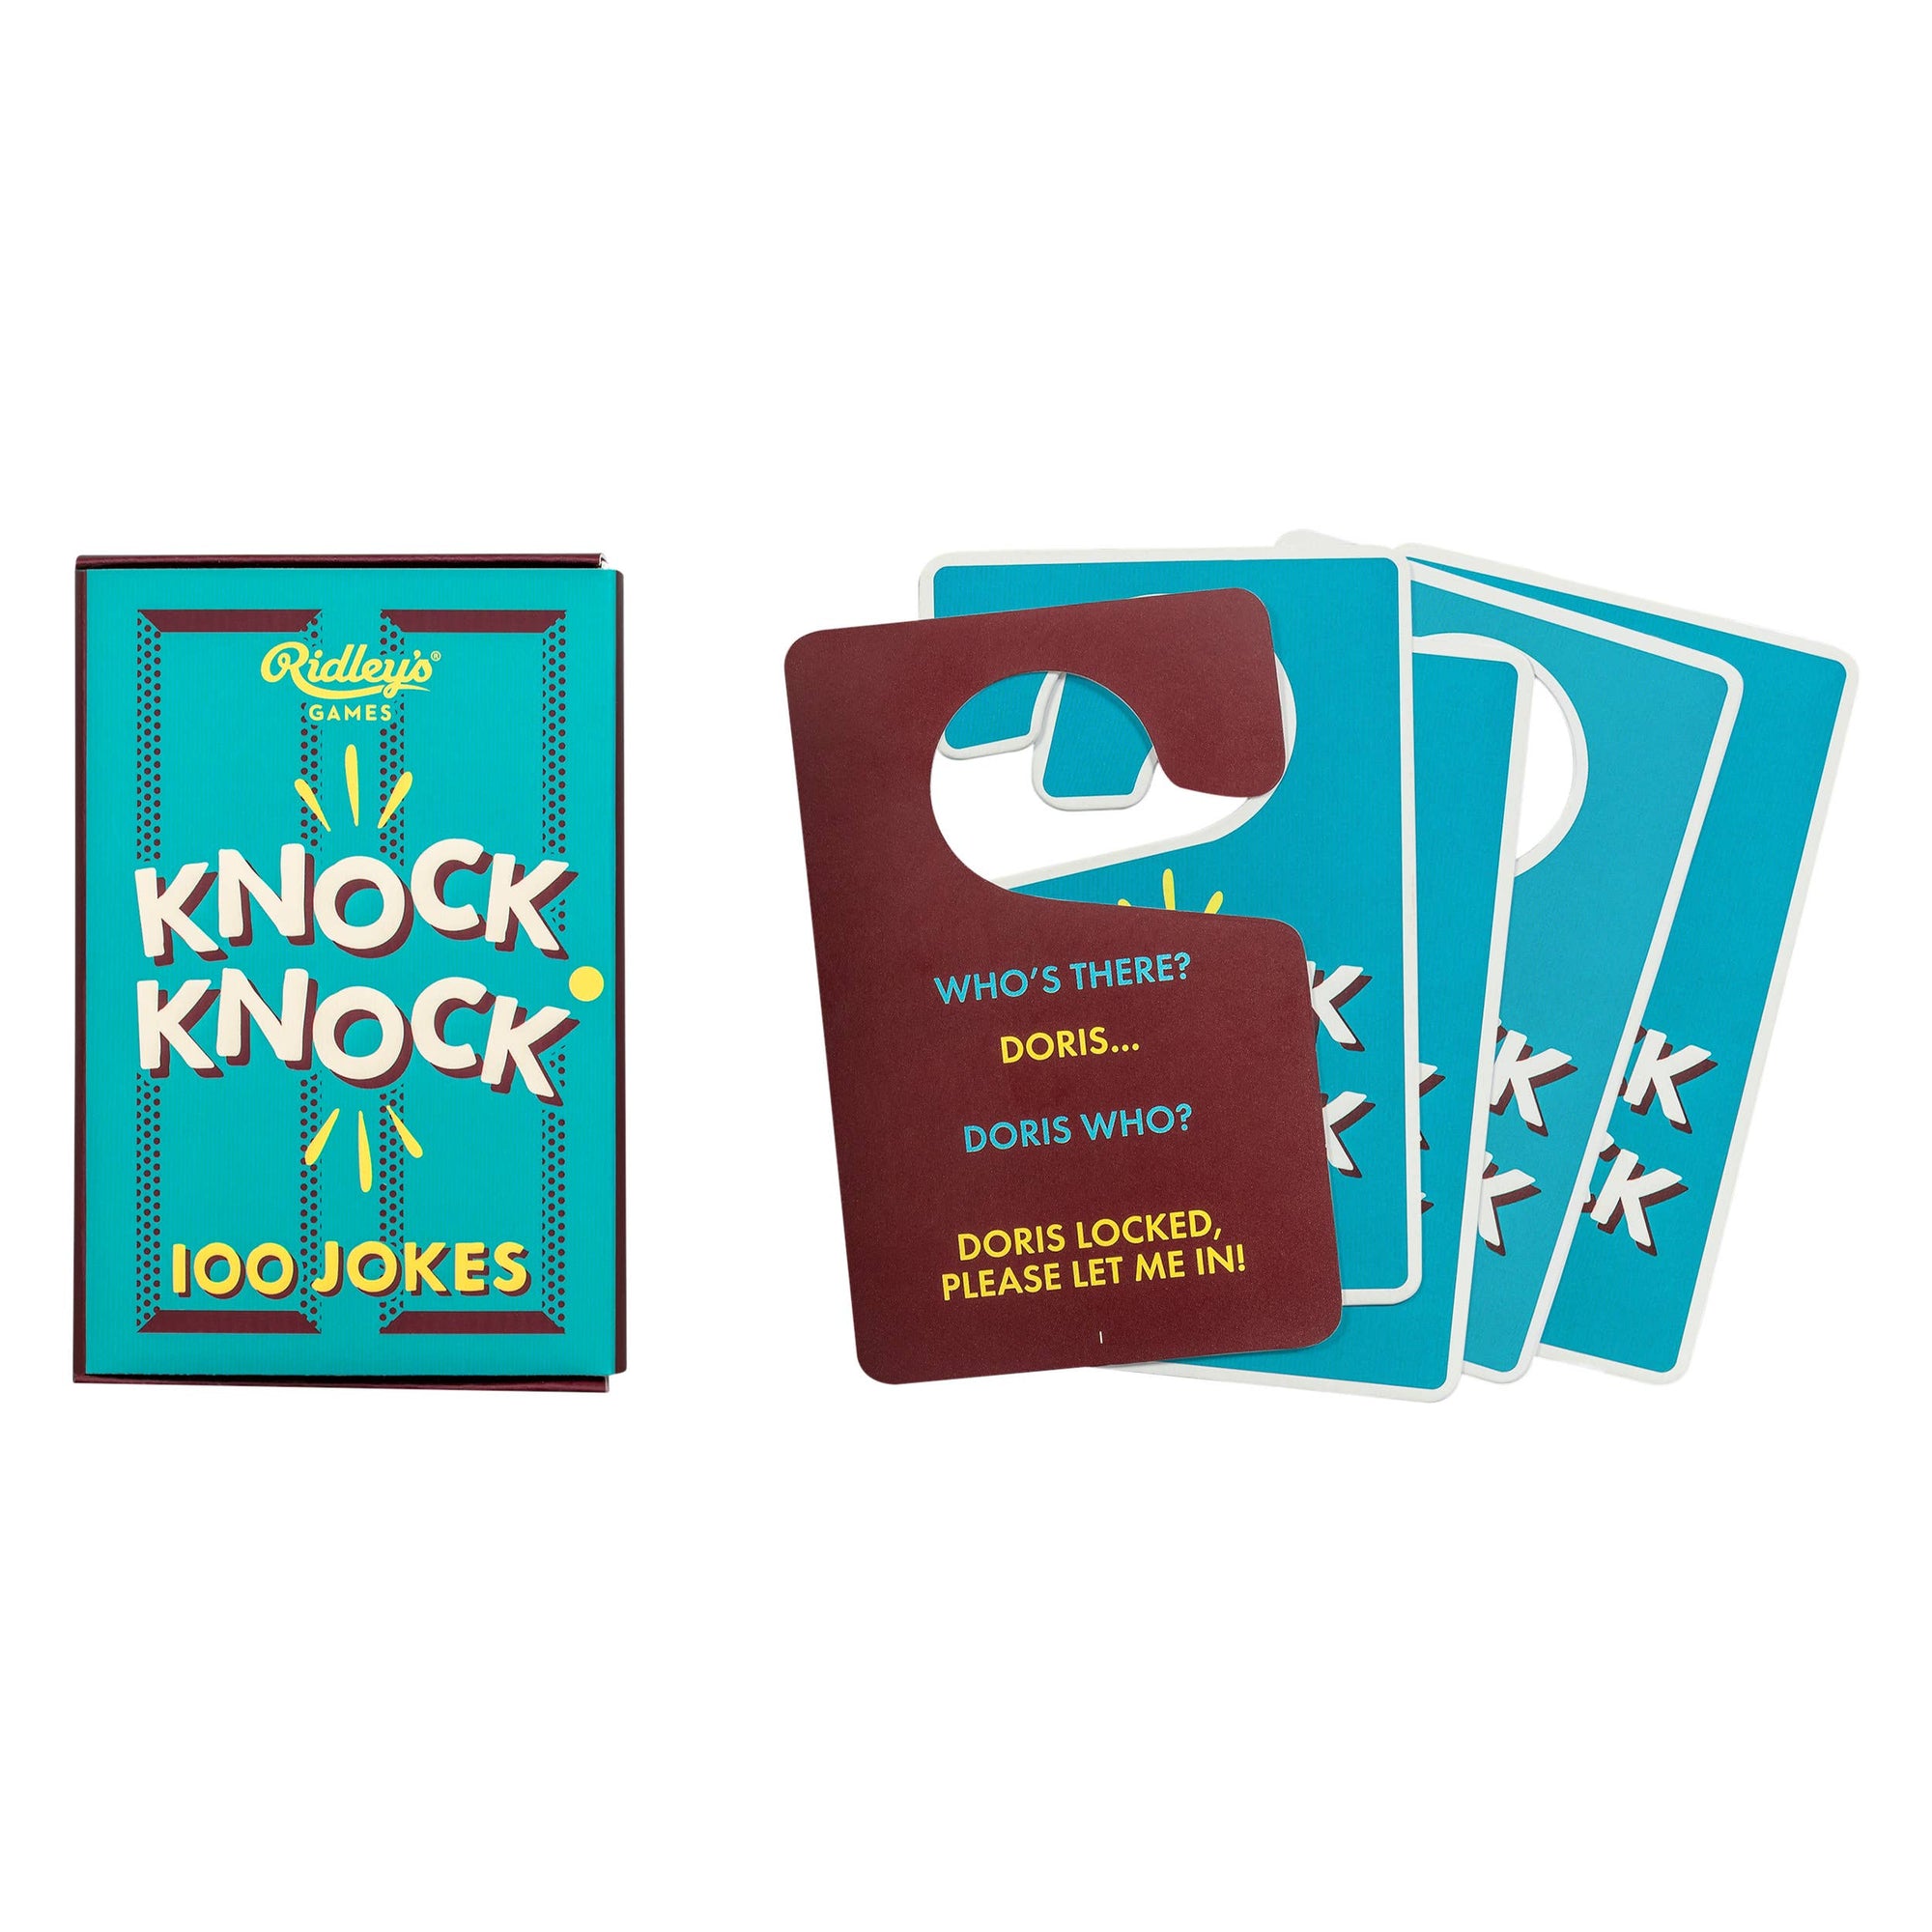 A group of 100 Knock Knock Jokes cards, perfect for kids to enjoy from Ridley's Games.